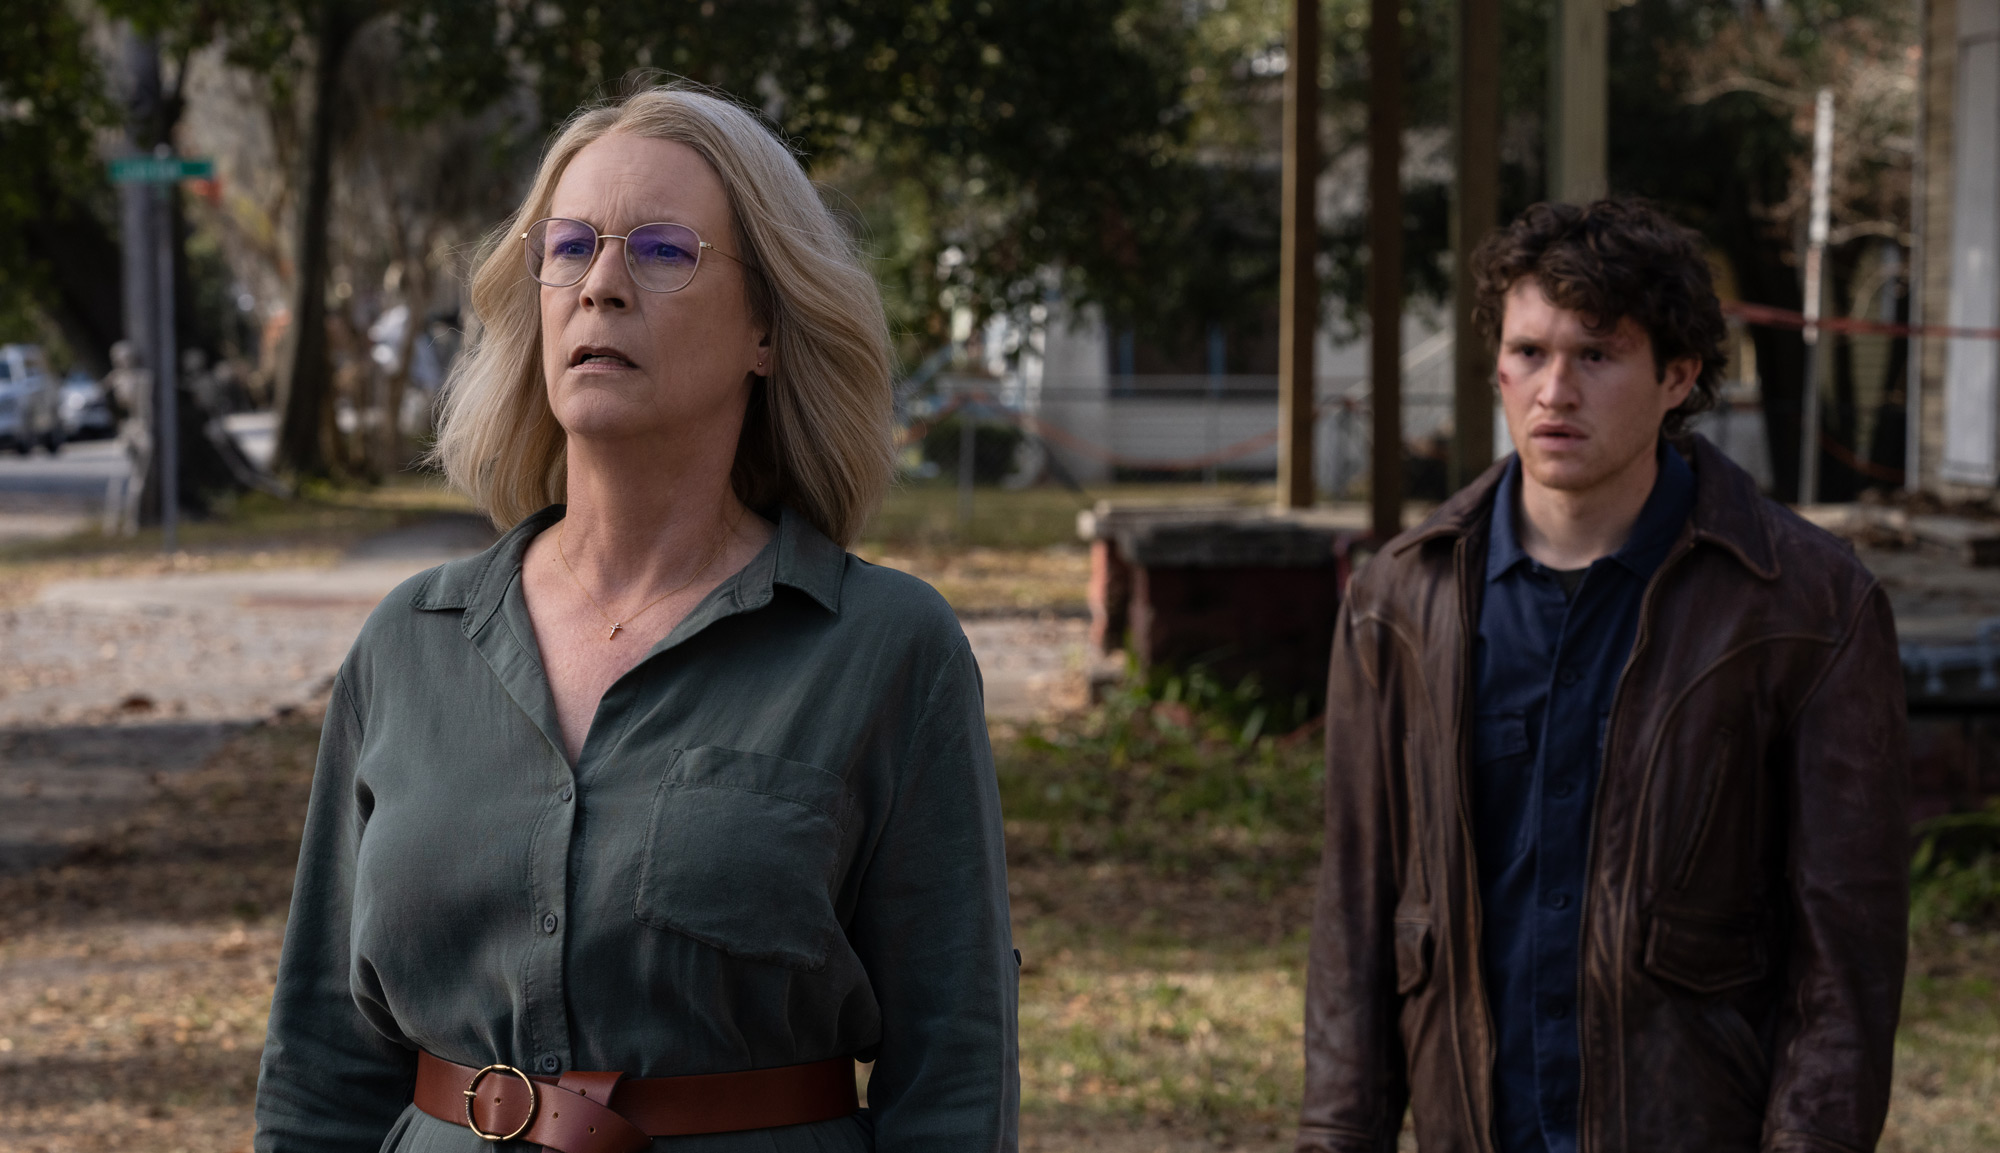 Jamie Lee Curtis and Rohan Campbell in "Halloween Ends"